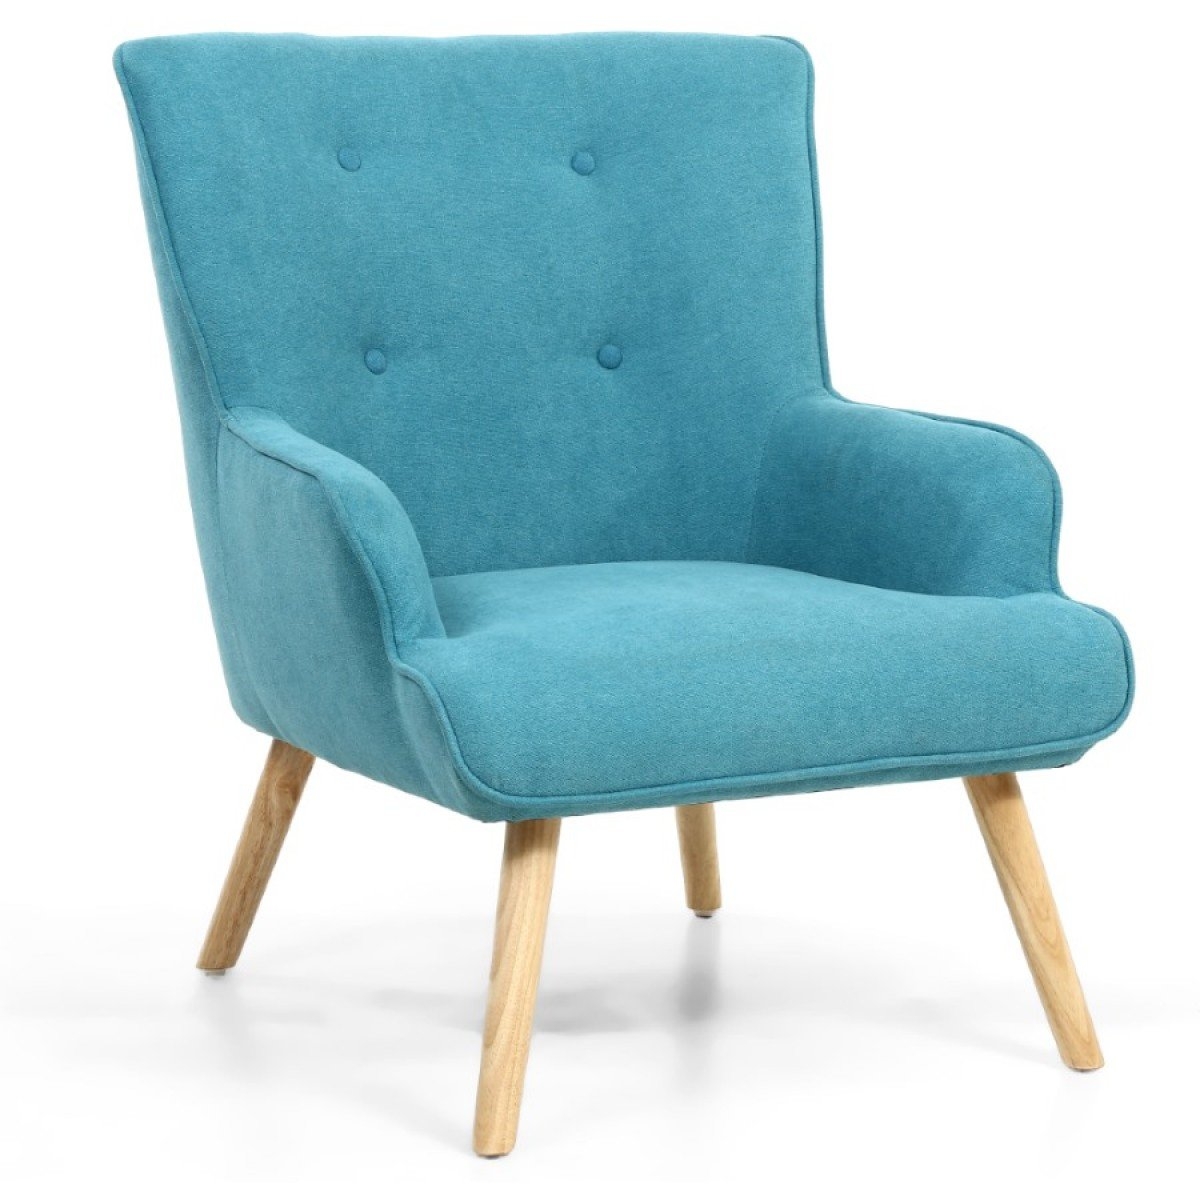 Accent Armchair in Silver Grey or Turquoise Blue – By CGC Interiors